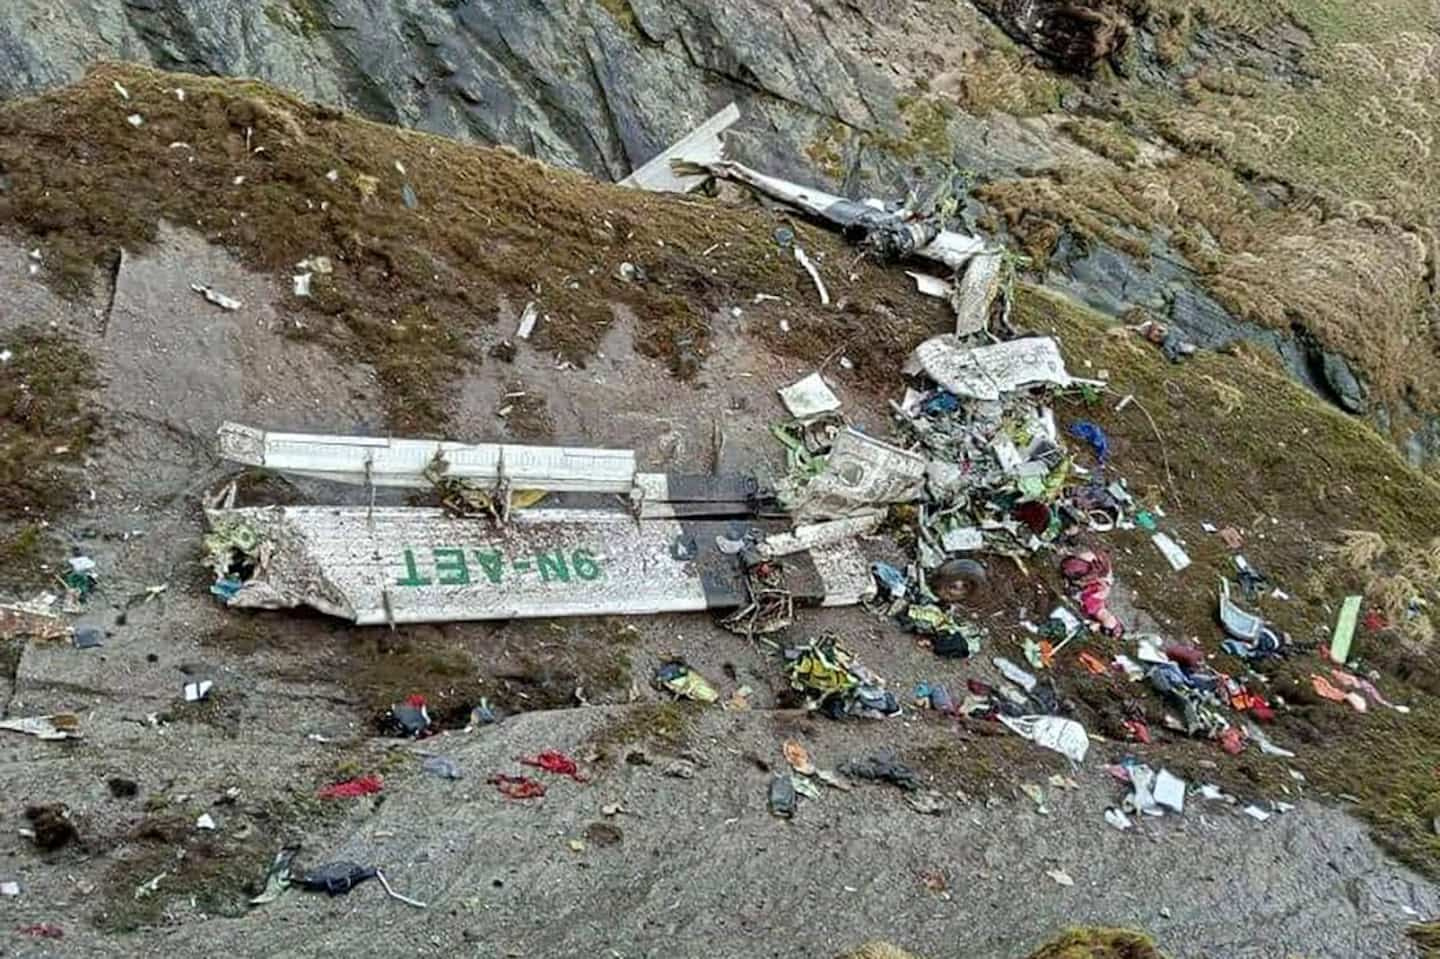 Nepal: the wreckage of the plane with 22 people on board has been found